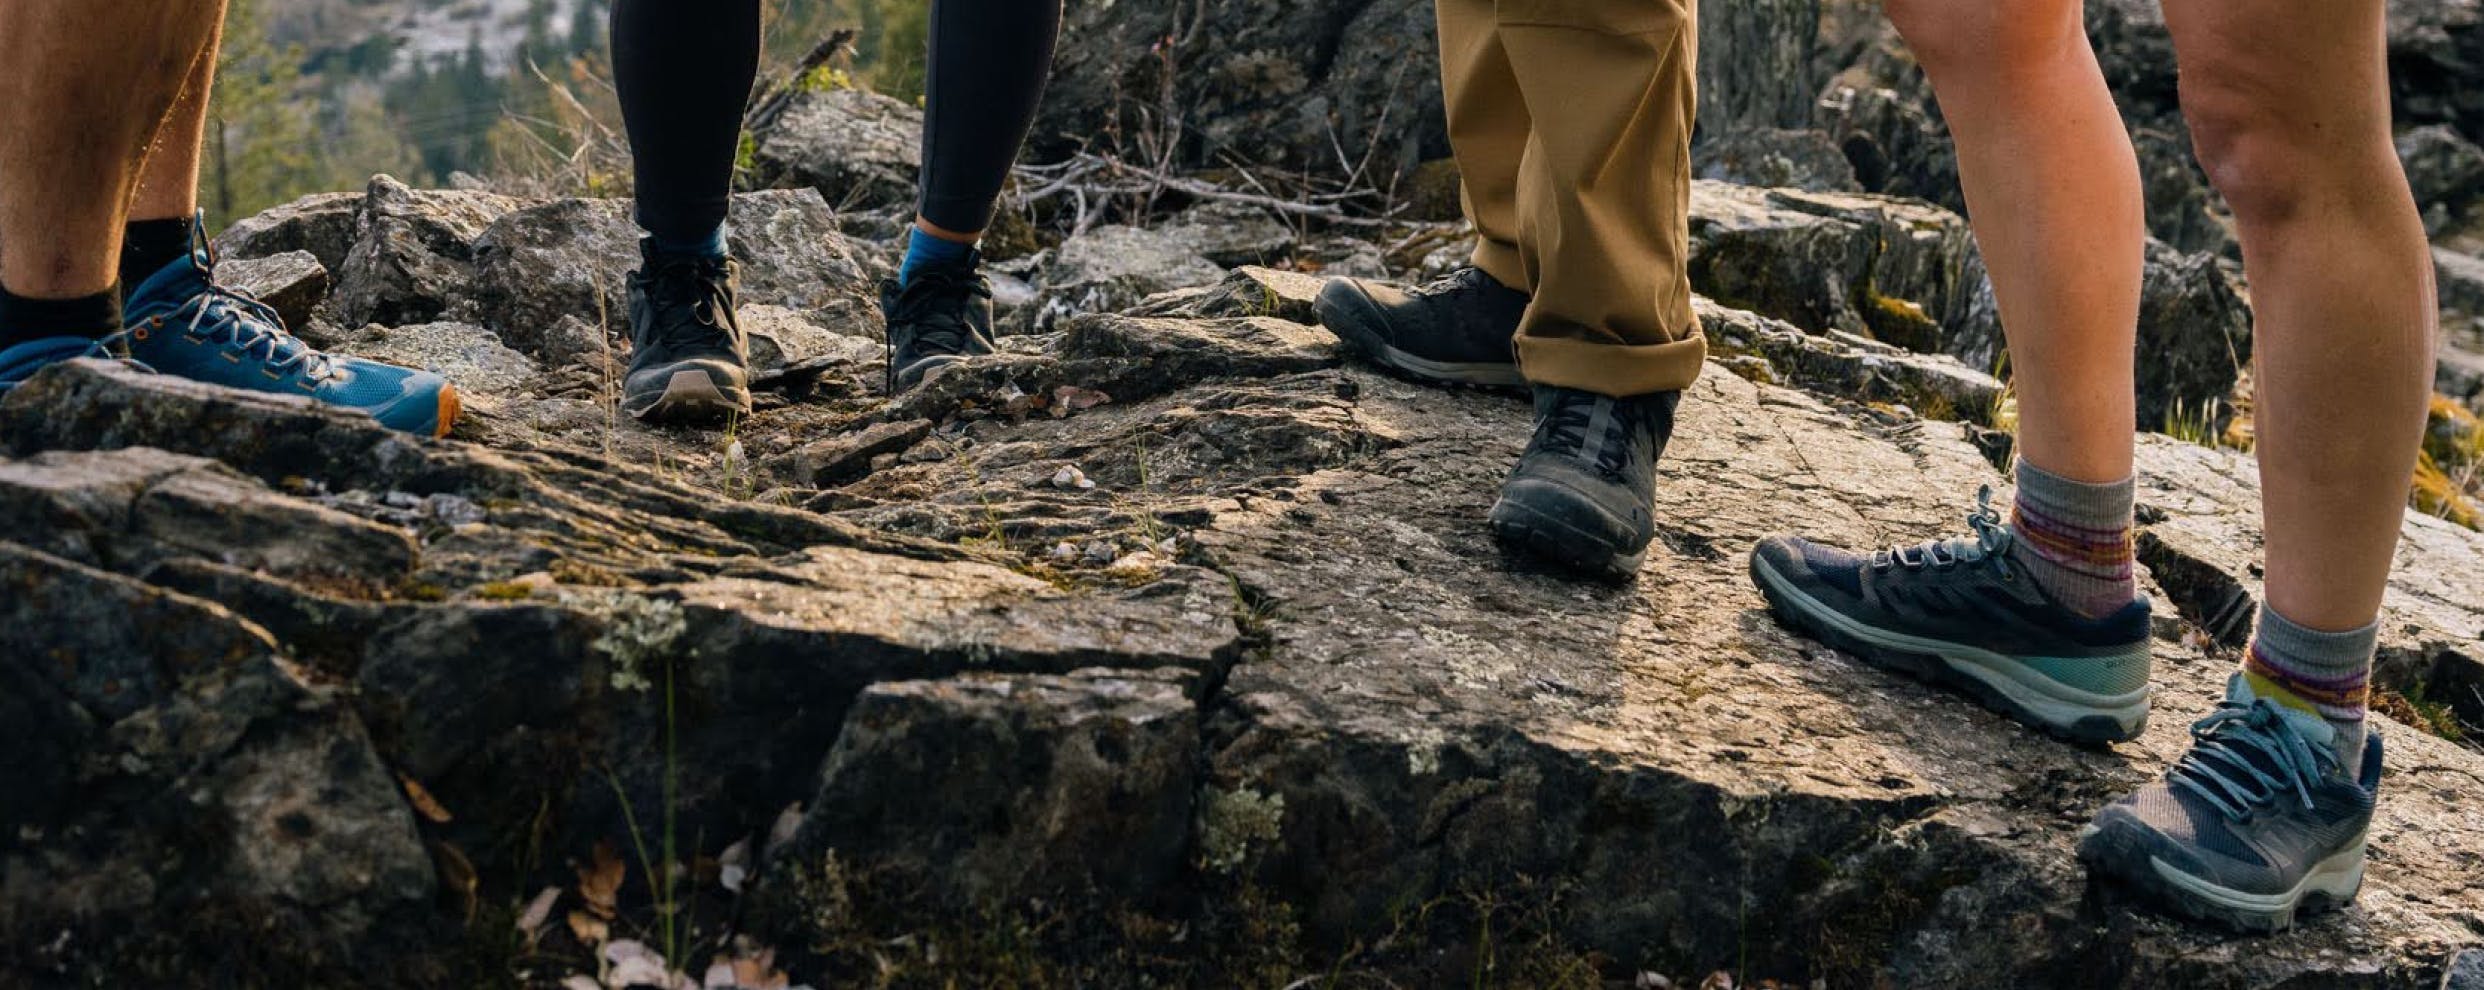 Lace up with long-lasting hiking boots or shoes to head out and explore the trails.